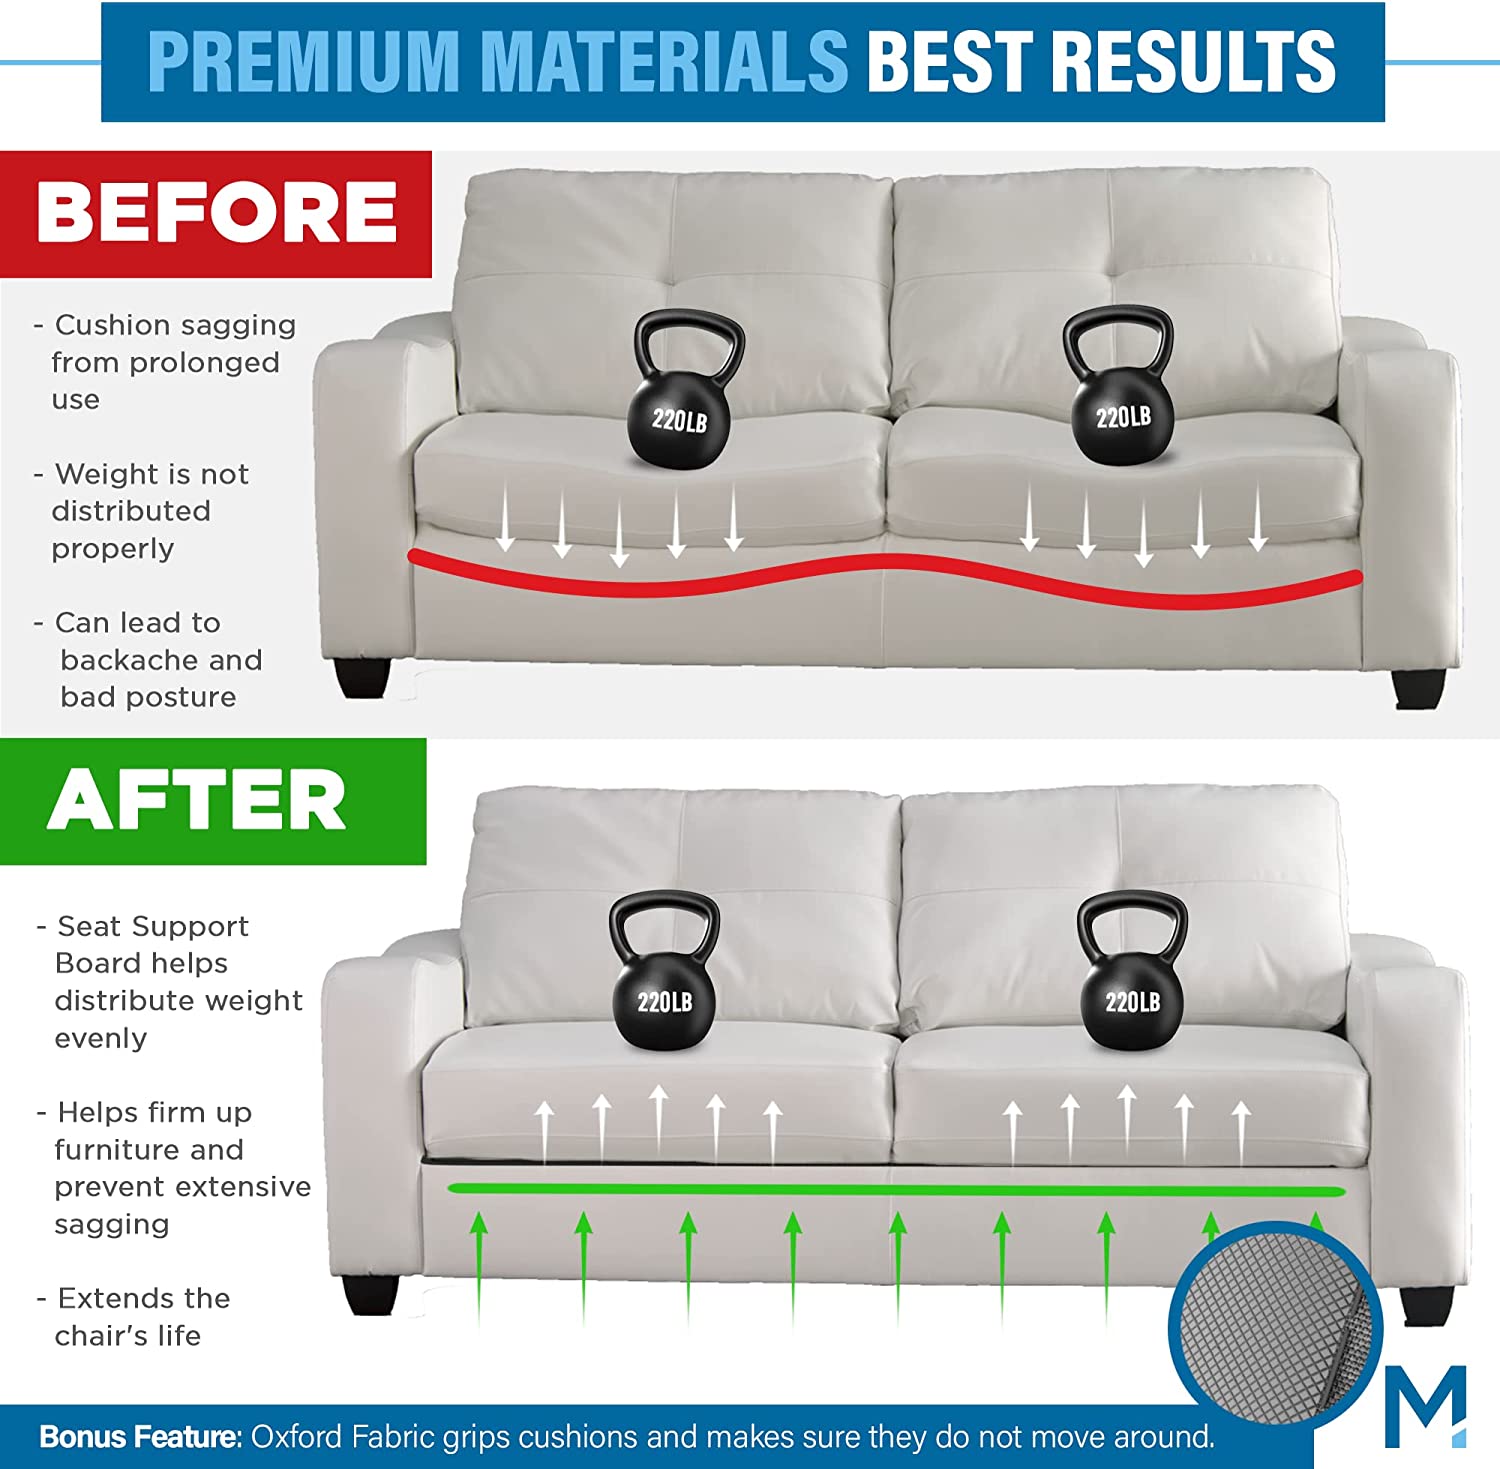 How Can I Make Couch Cushions Firmer?